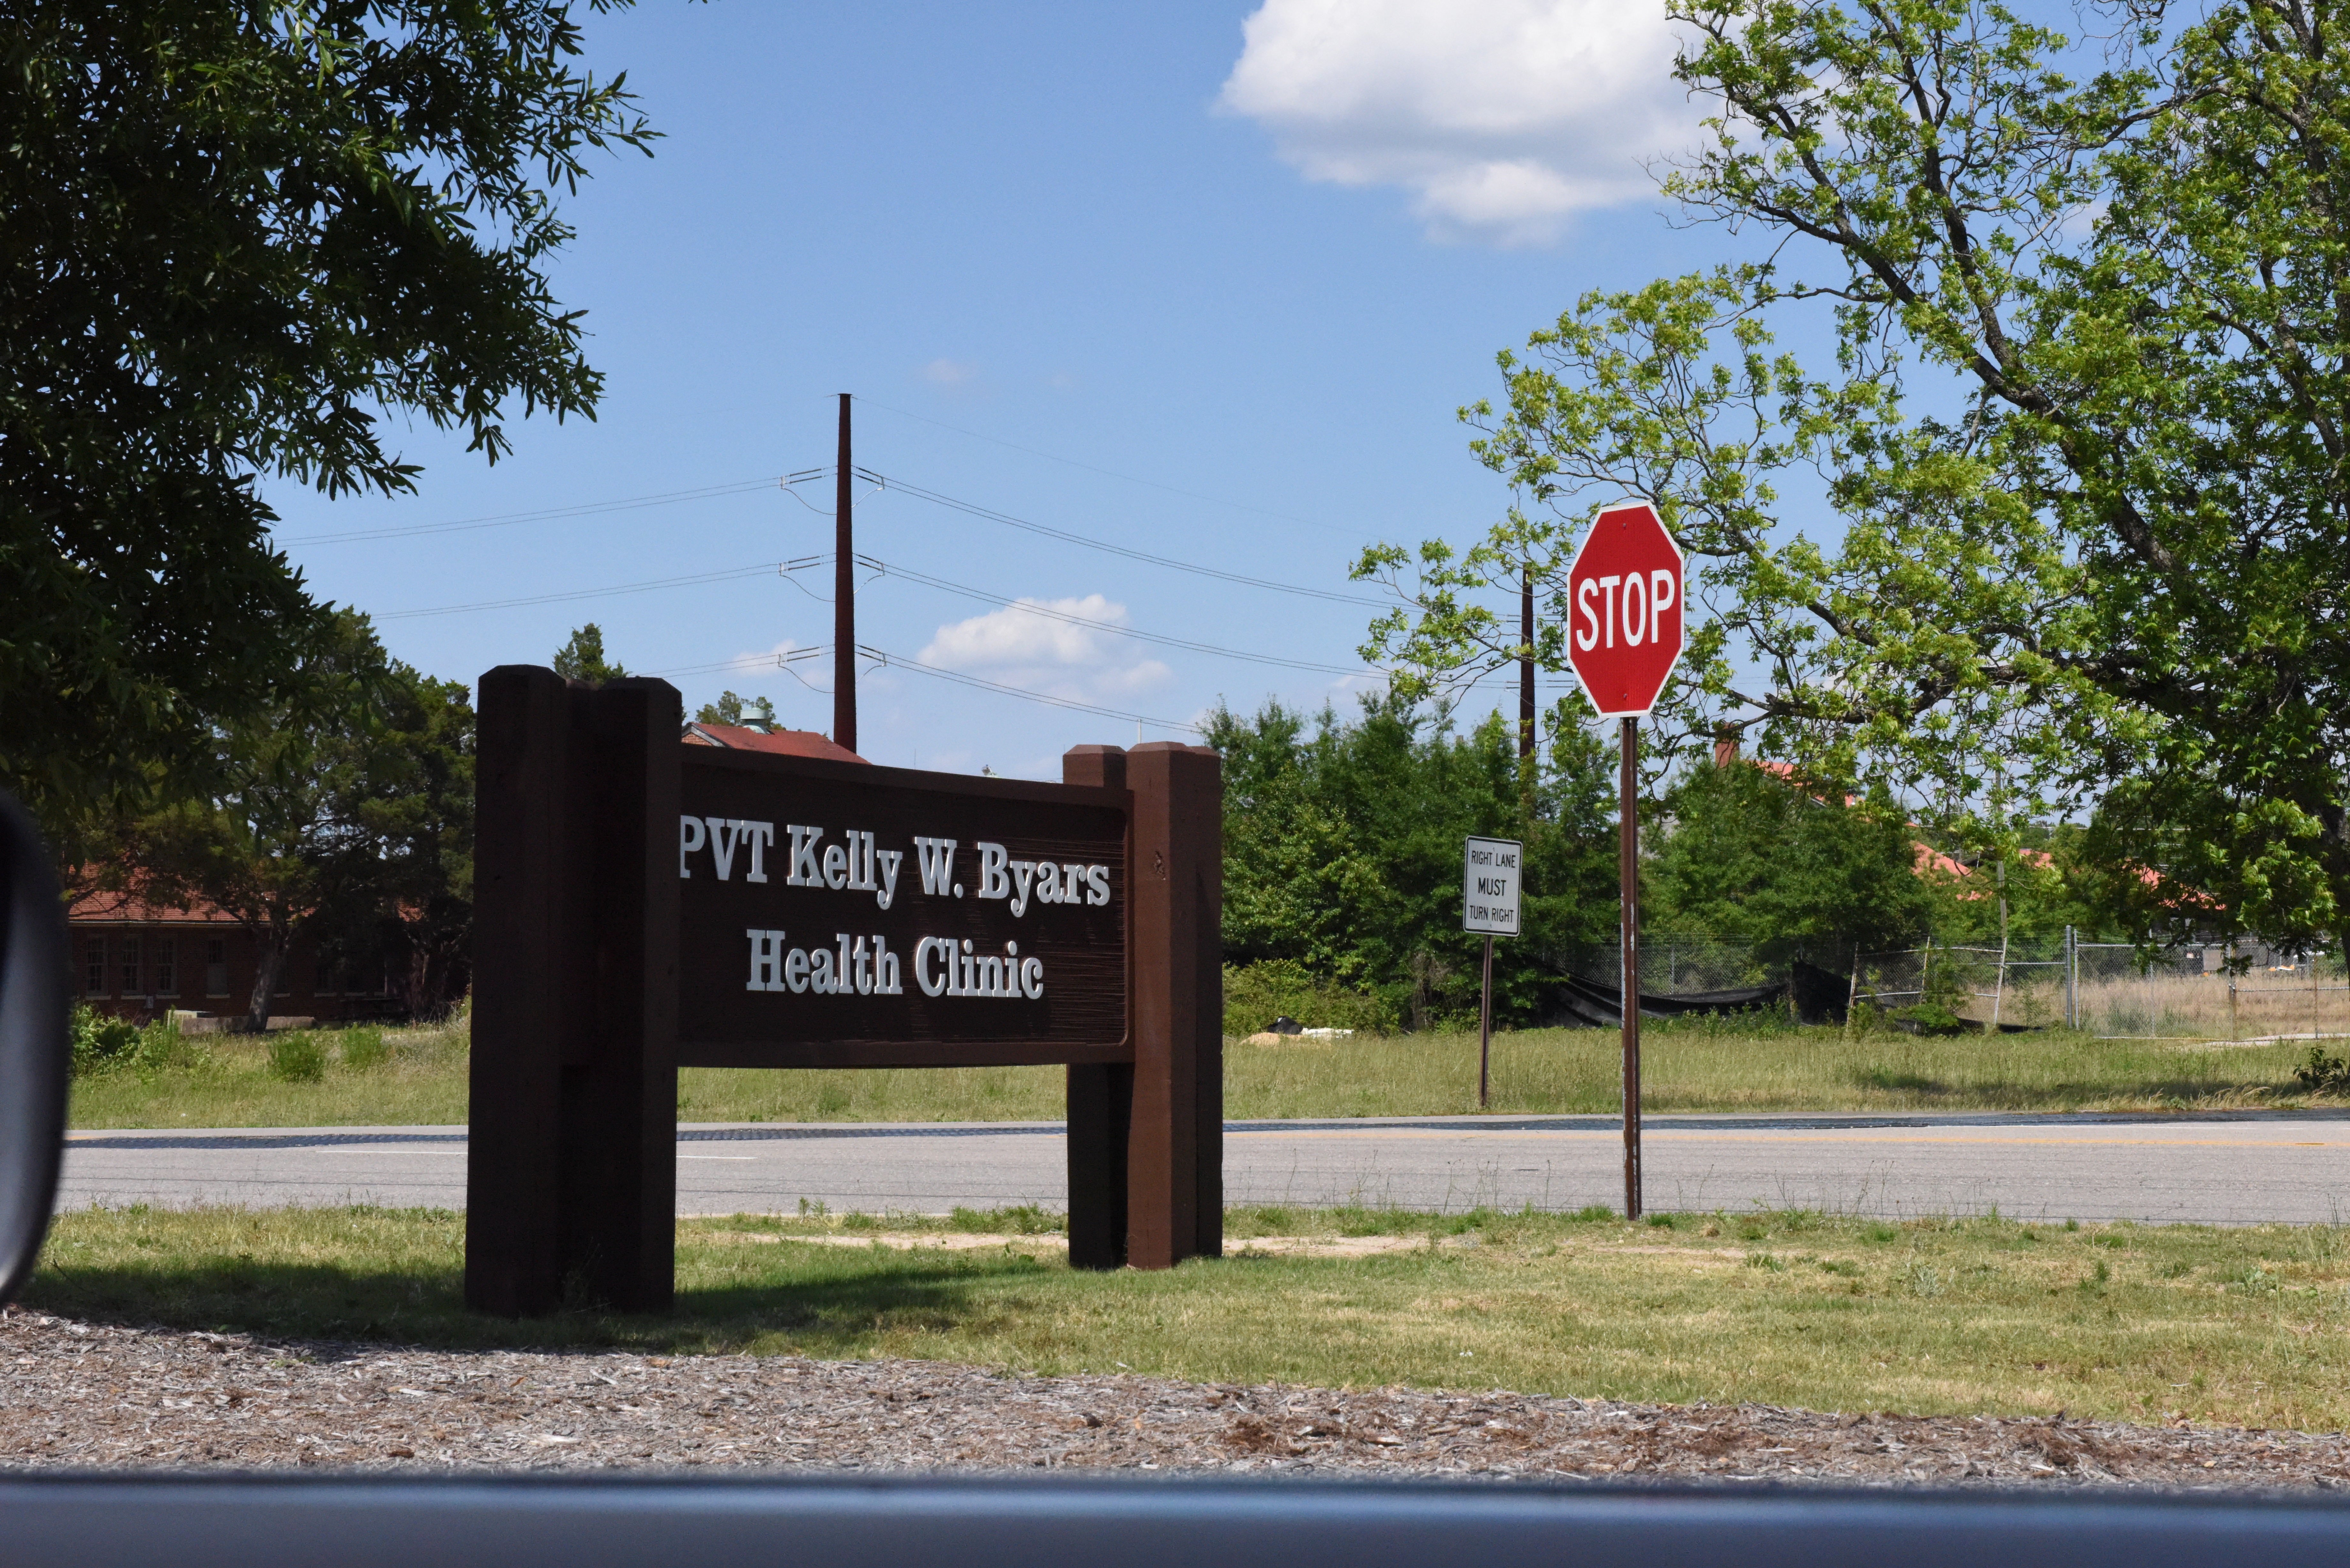 Troop And Family Health Clinic Renamed Pvt Kelly Byars Health Clinic Article The United States Army